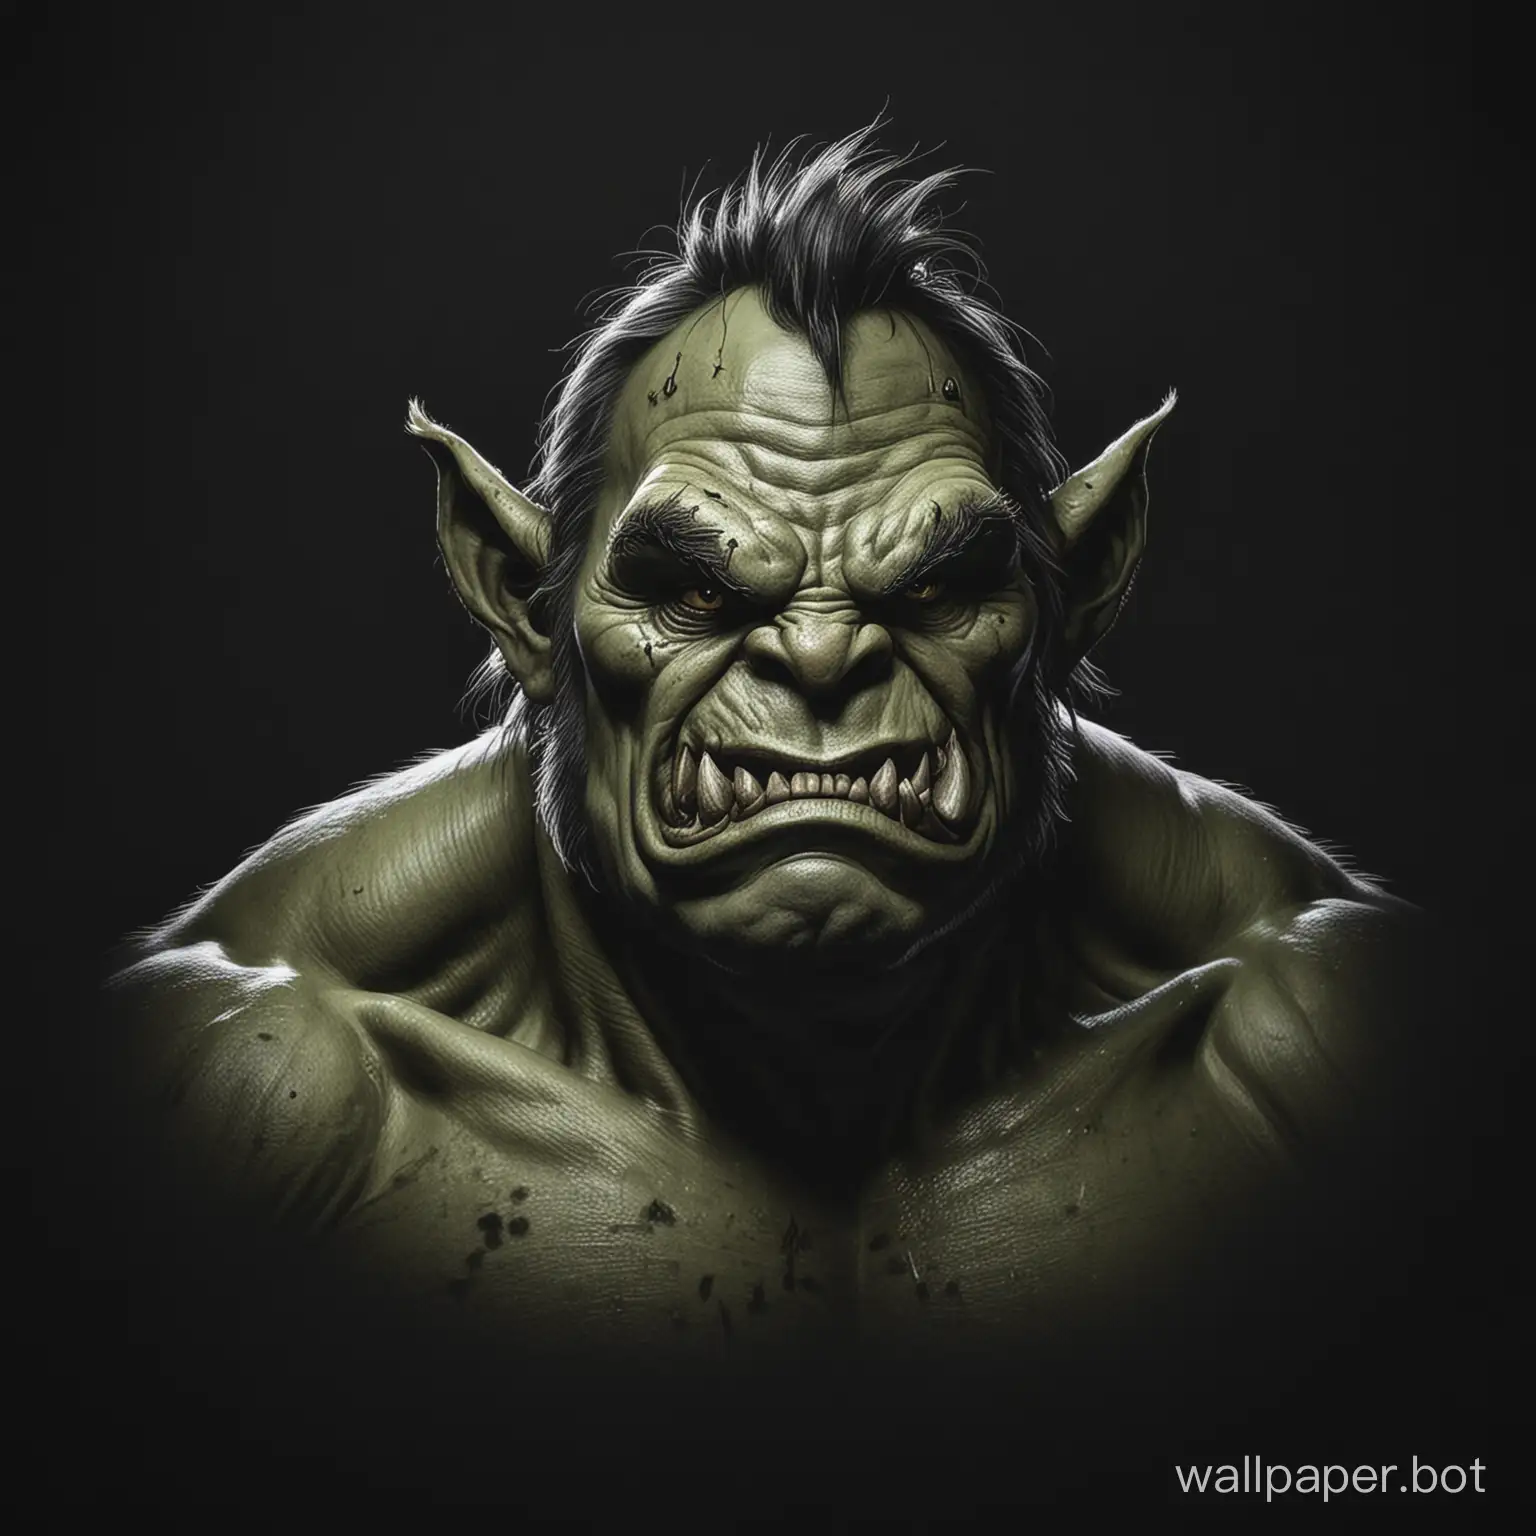 draw an ogre on a black background